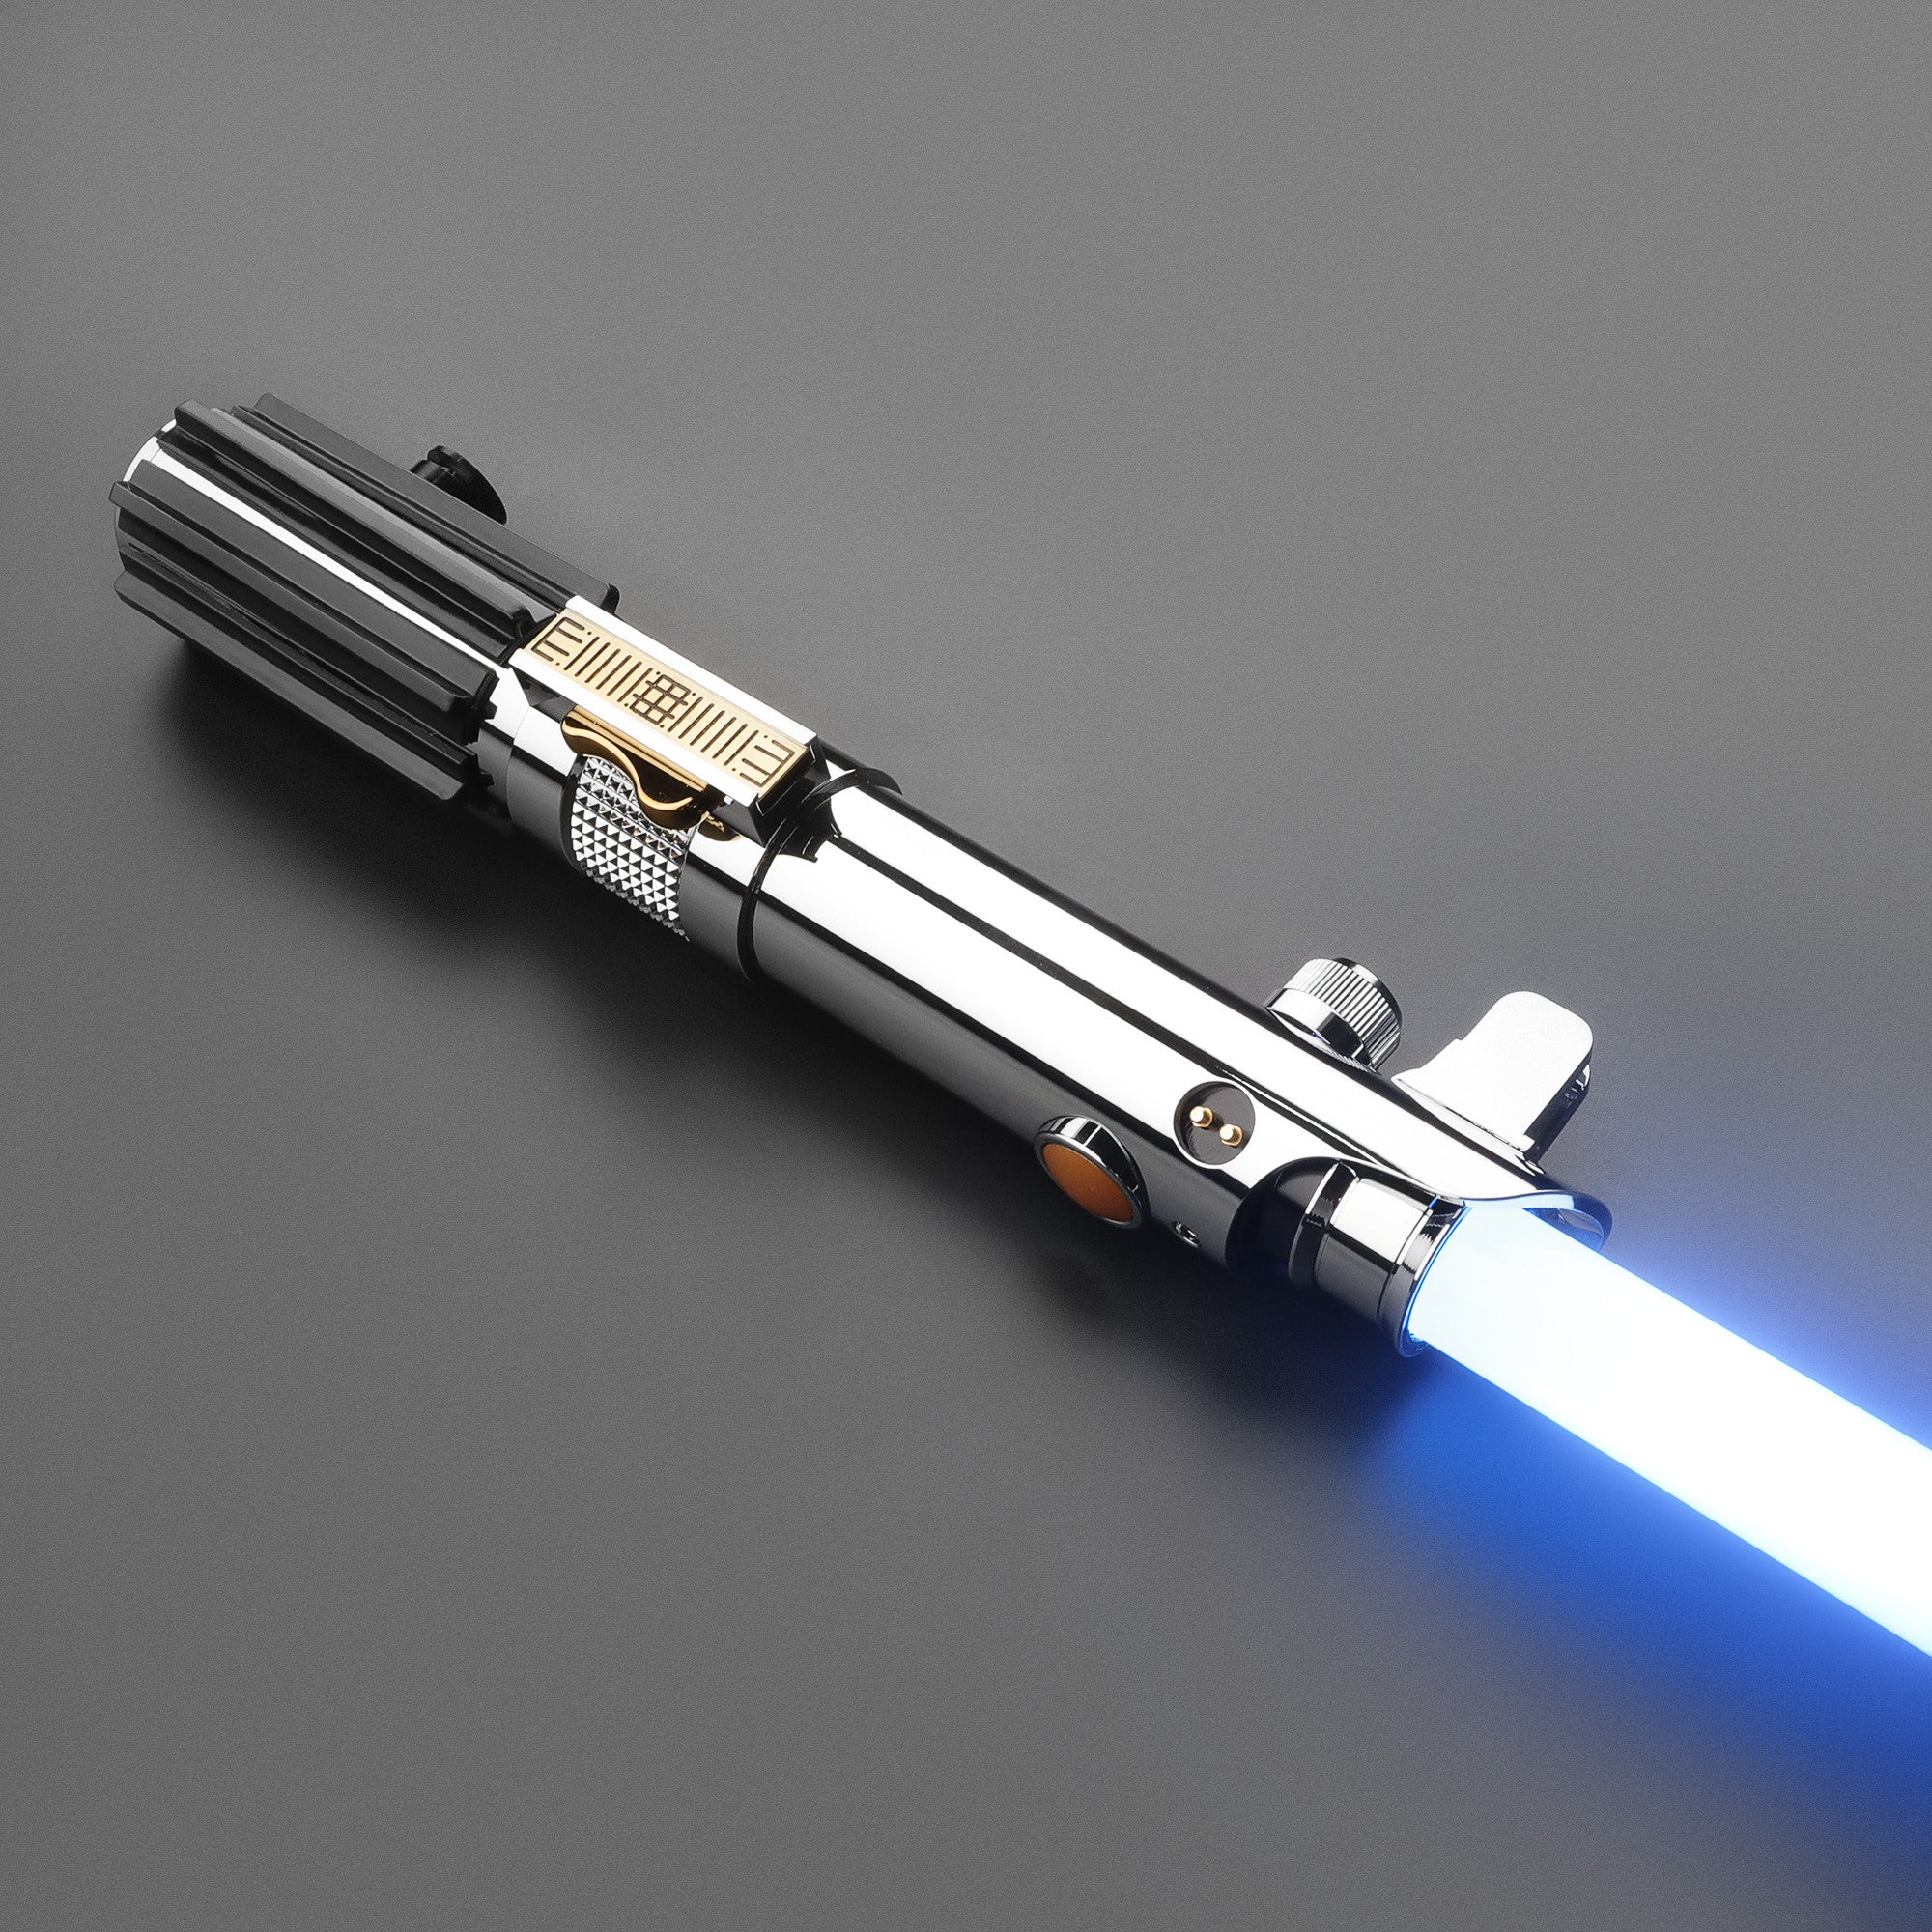 New High-end Collectible Lightsaber Cool Toy Gift